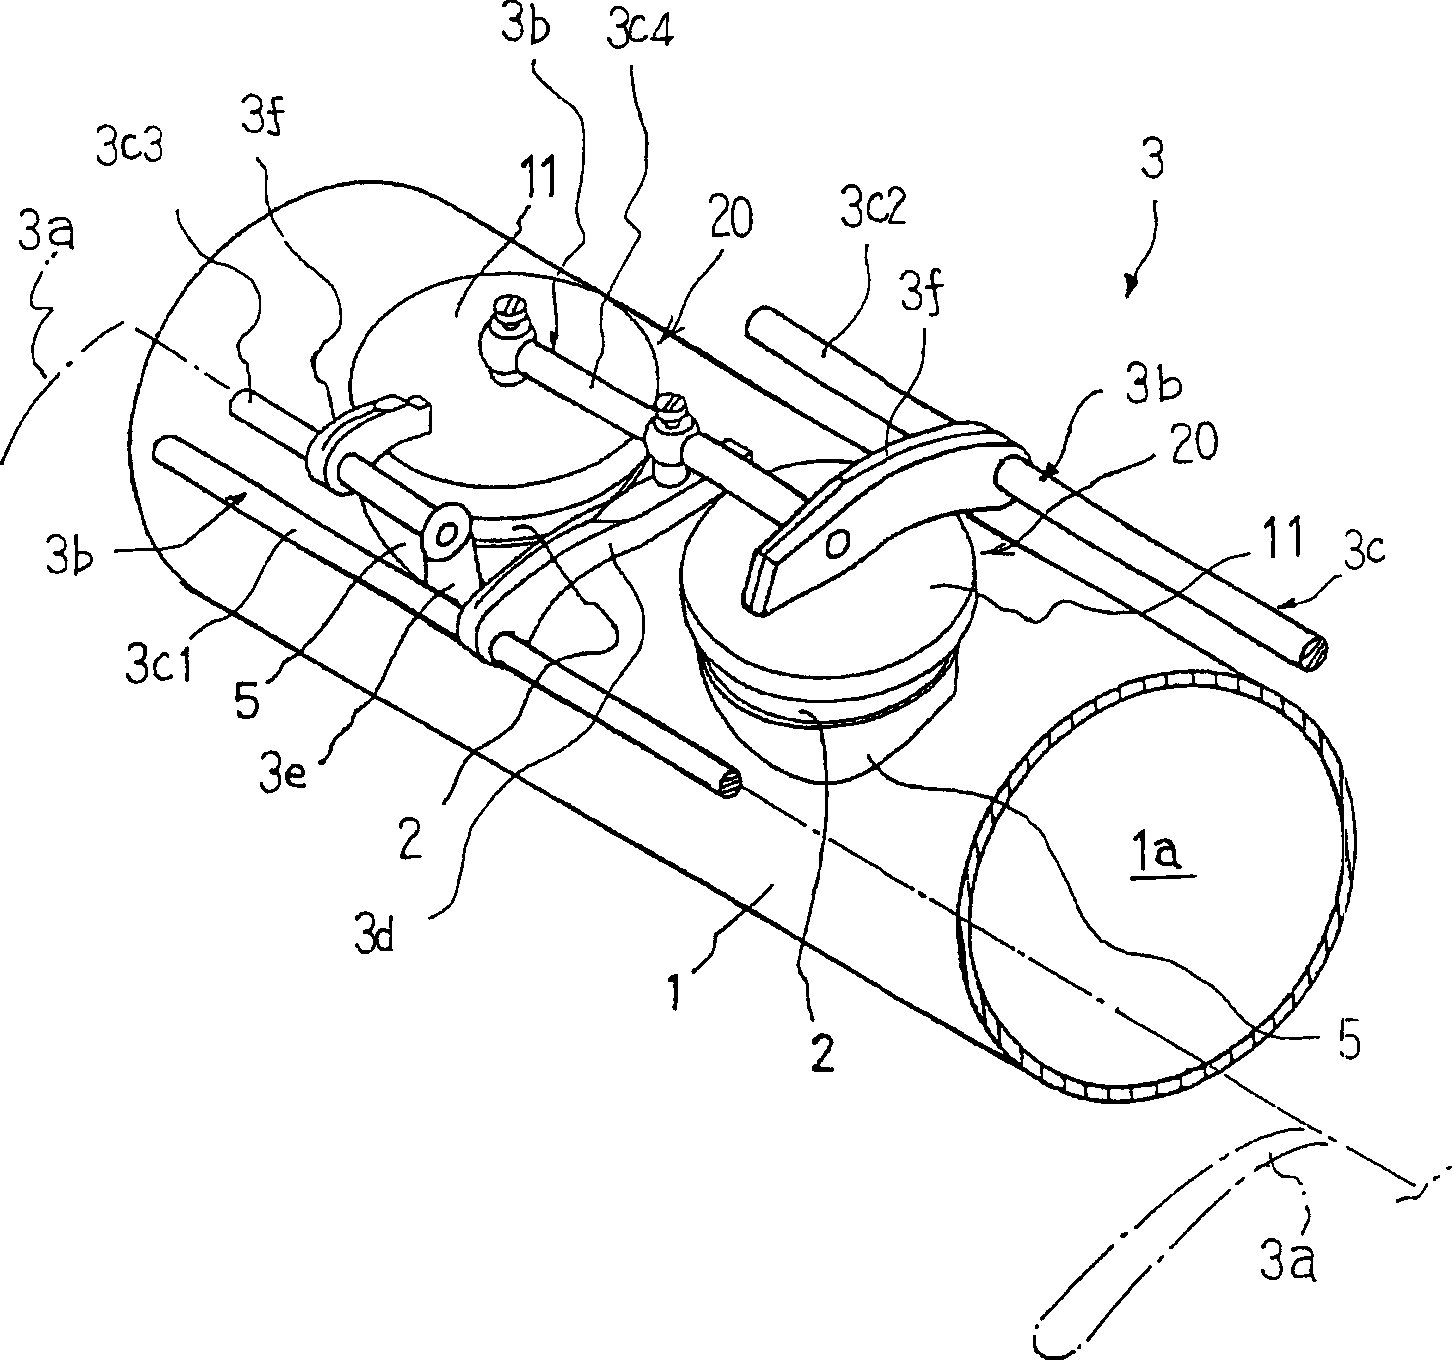 Woodwind instrument with key structure capable of closing hole completely